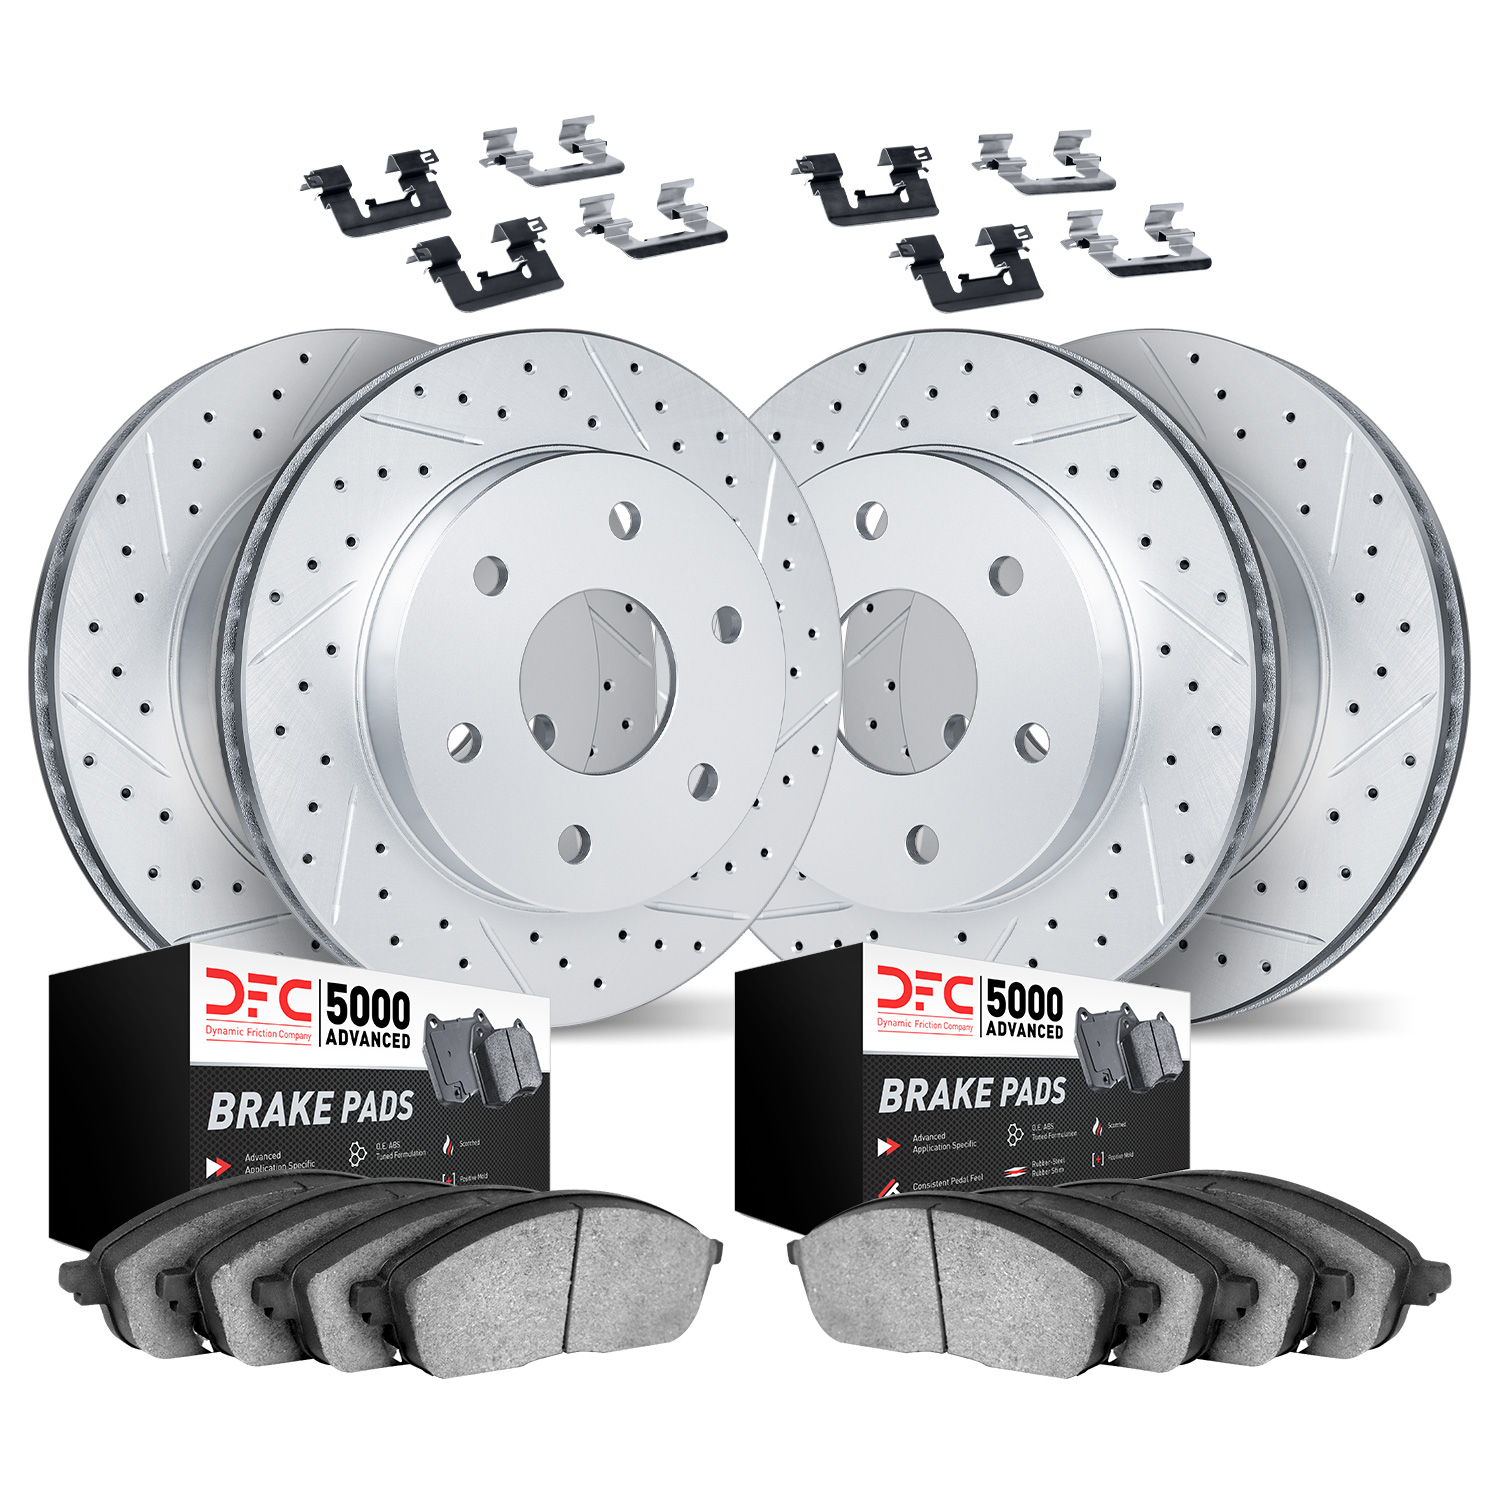 2514-48028 Geoperformance Drilled/Slotted Rotors w/5000 Advanced Brake Pads Kit & Hardware, 2006-2009 GM, Position: Front and Re